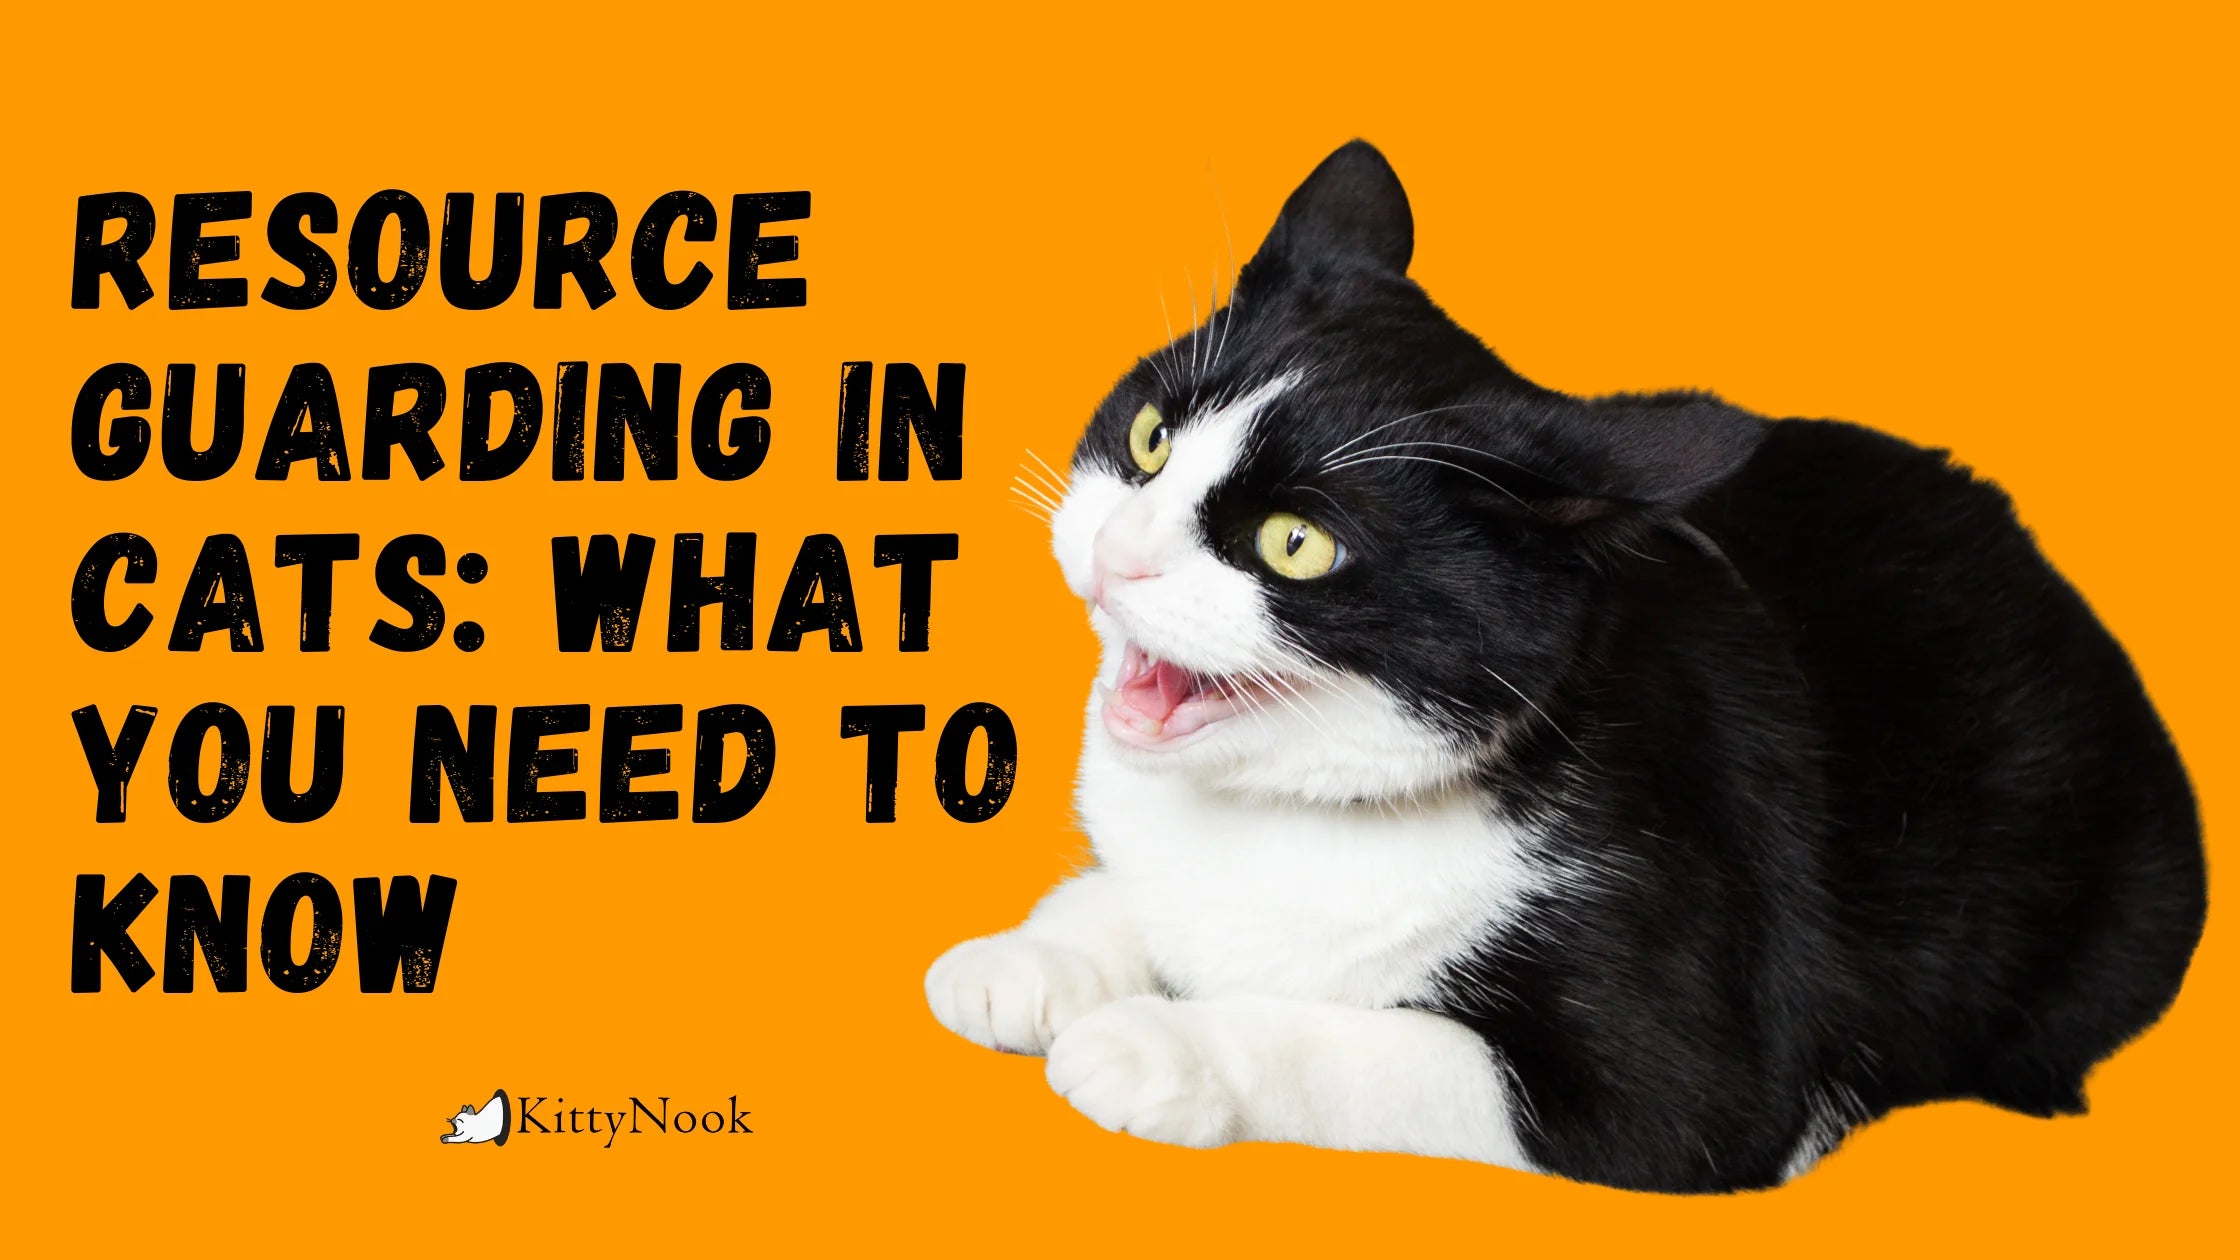 Resource Guarding In Cats: What You Need To Know - KittyNook Cat Company